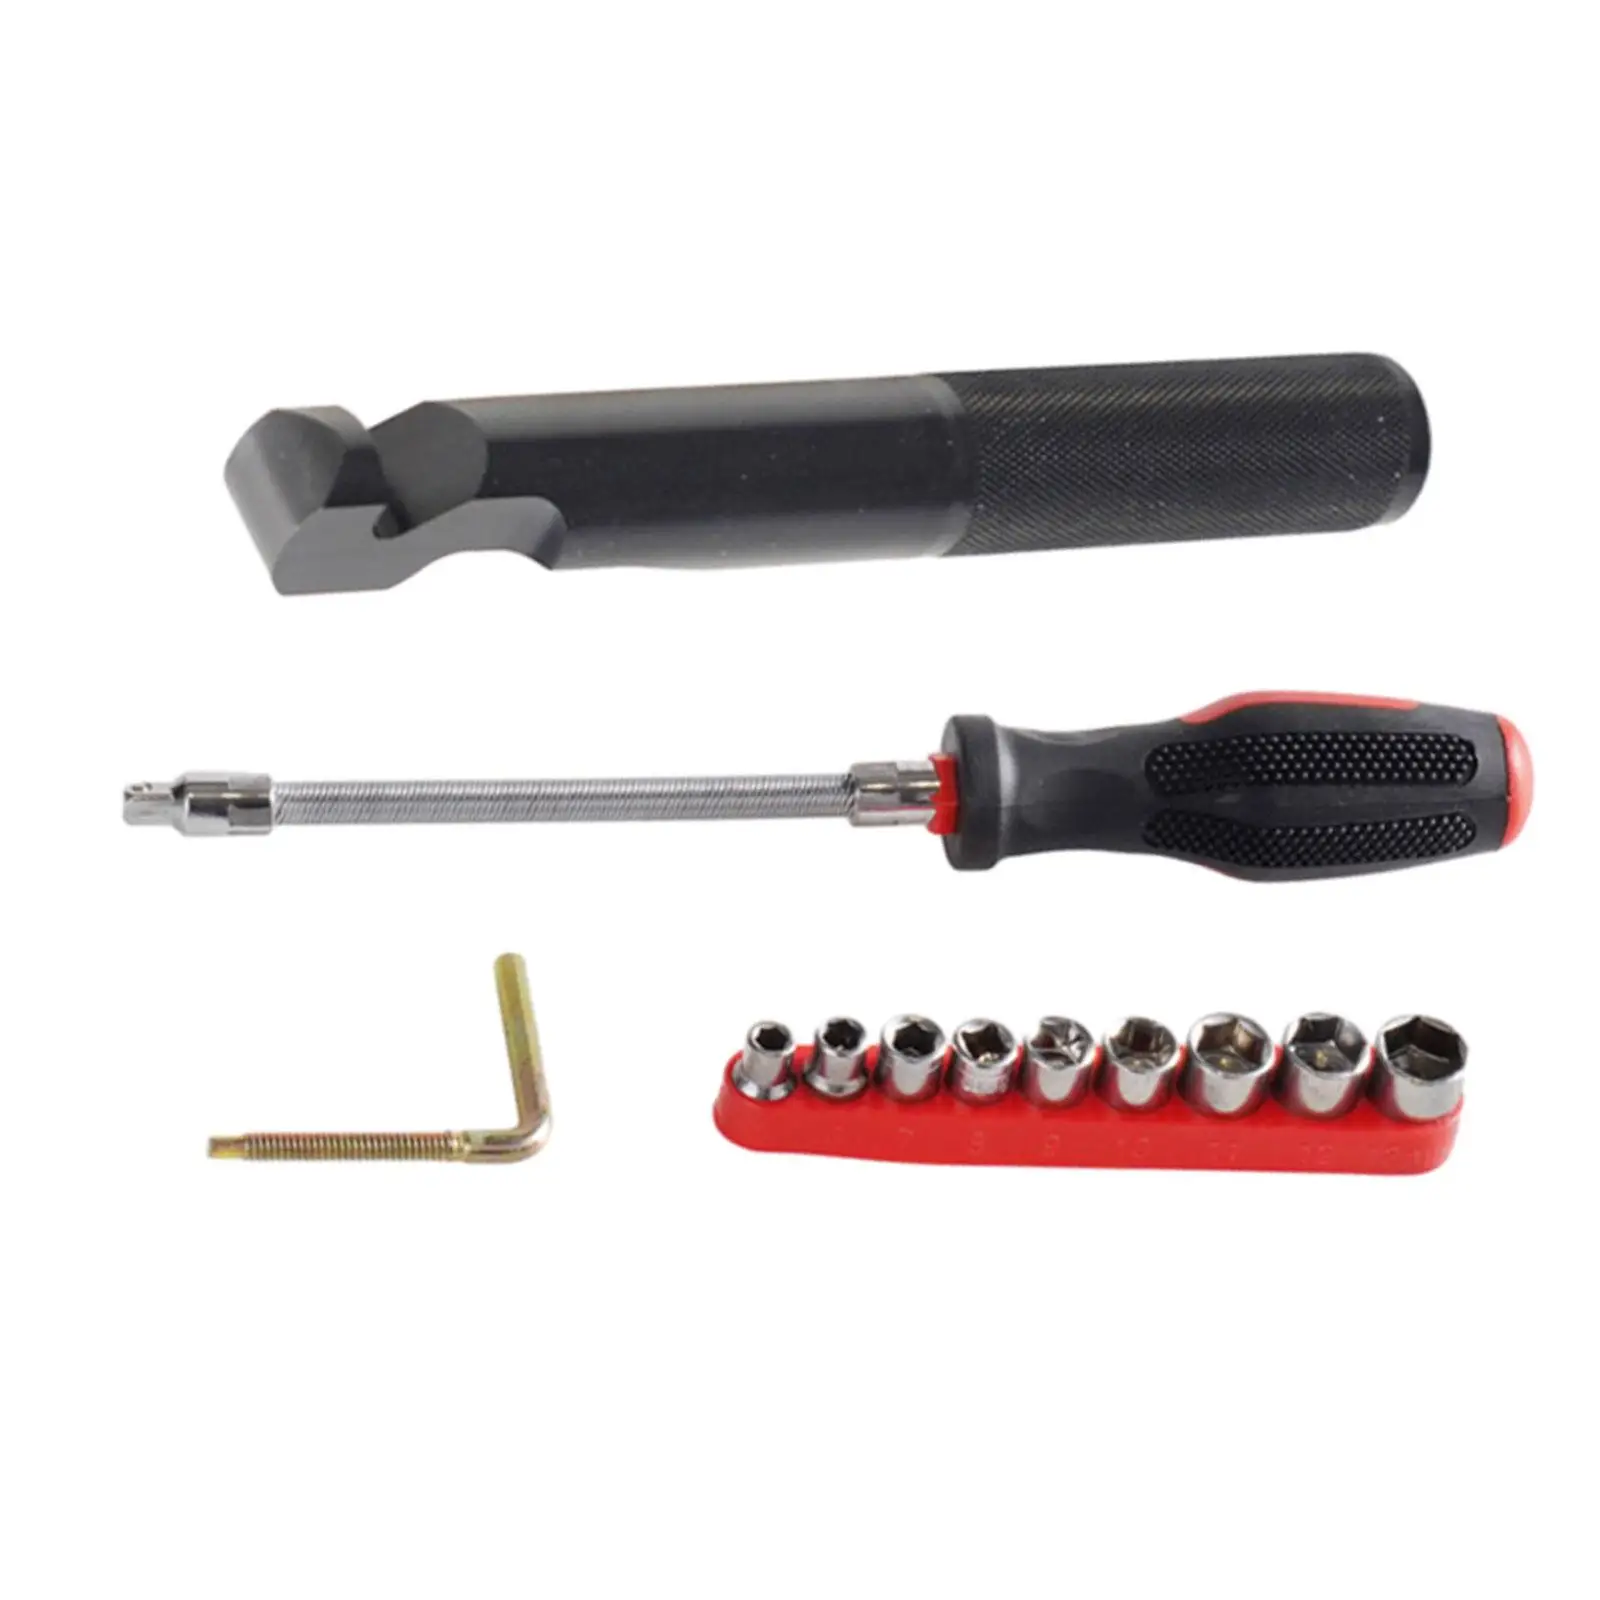 Belt Changing Tool Clutch Removal Tool Nonslip Handle Multifunctional Practical for RZR XP4 1000 XP RZR S 900 Repair Parts